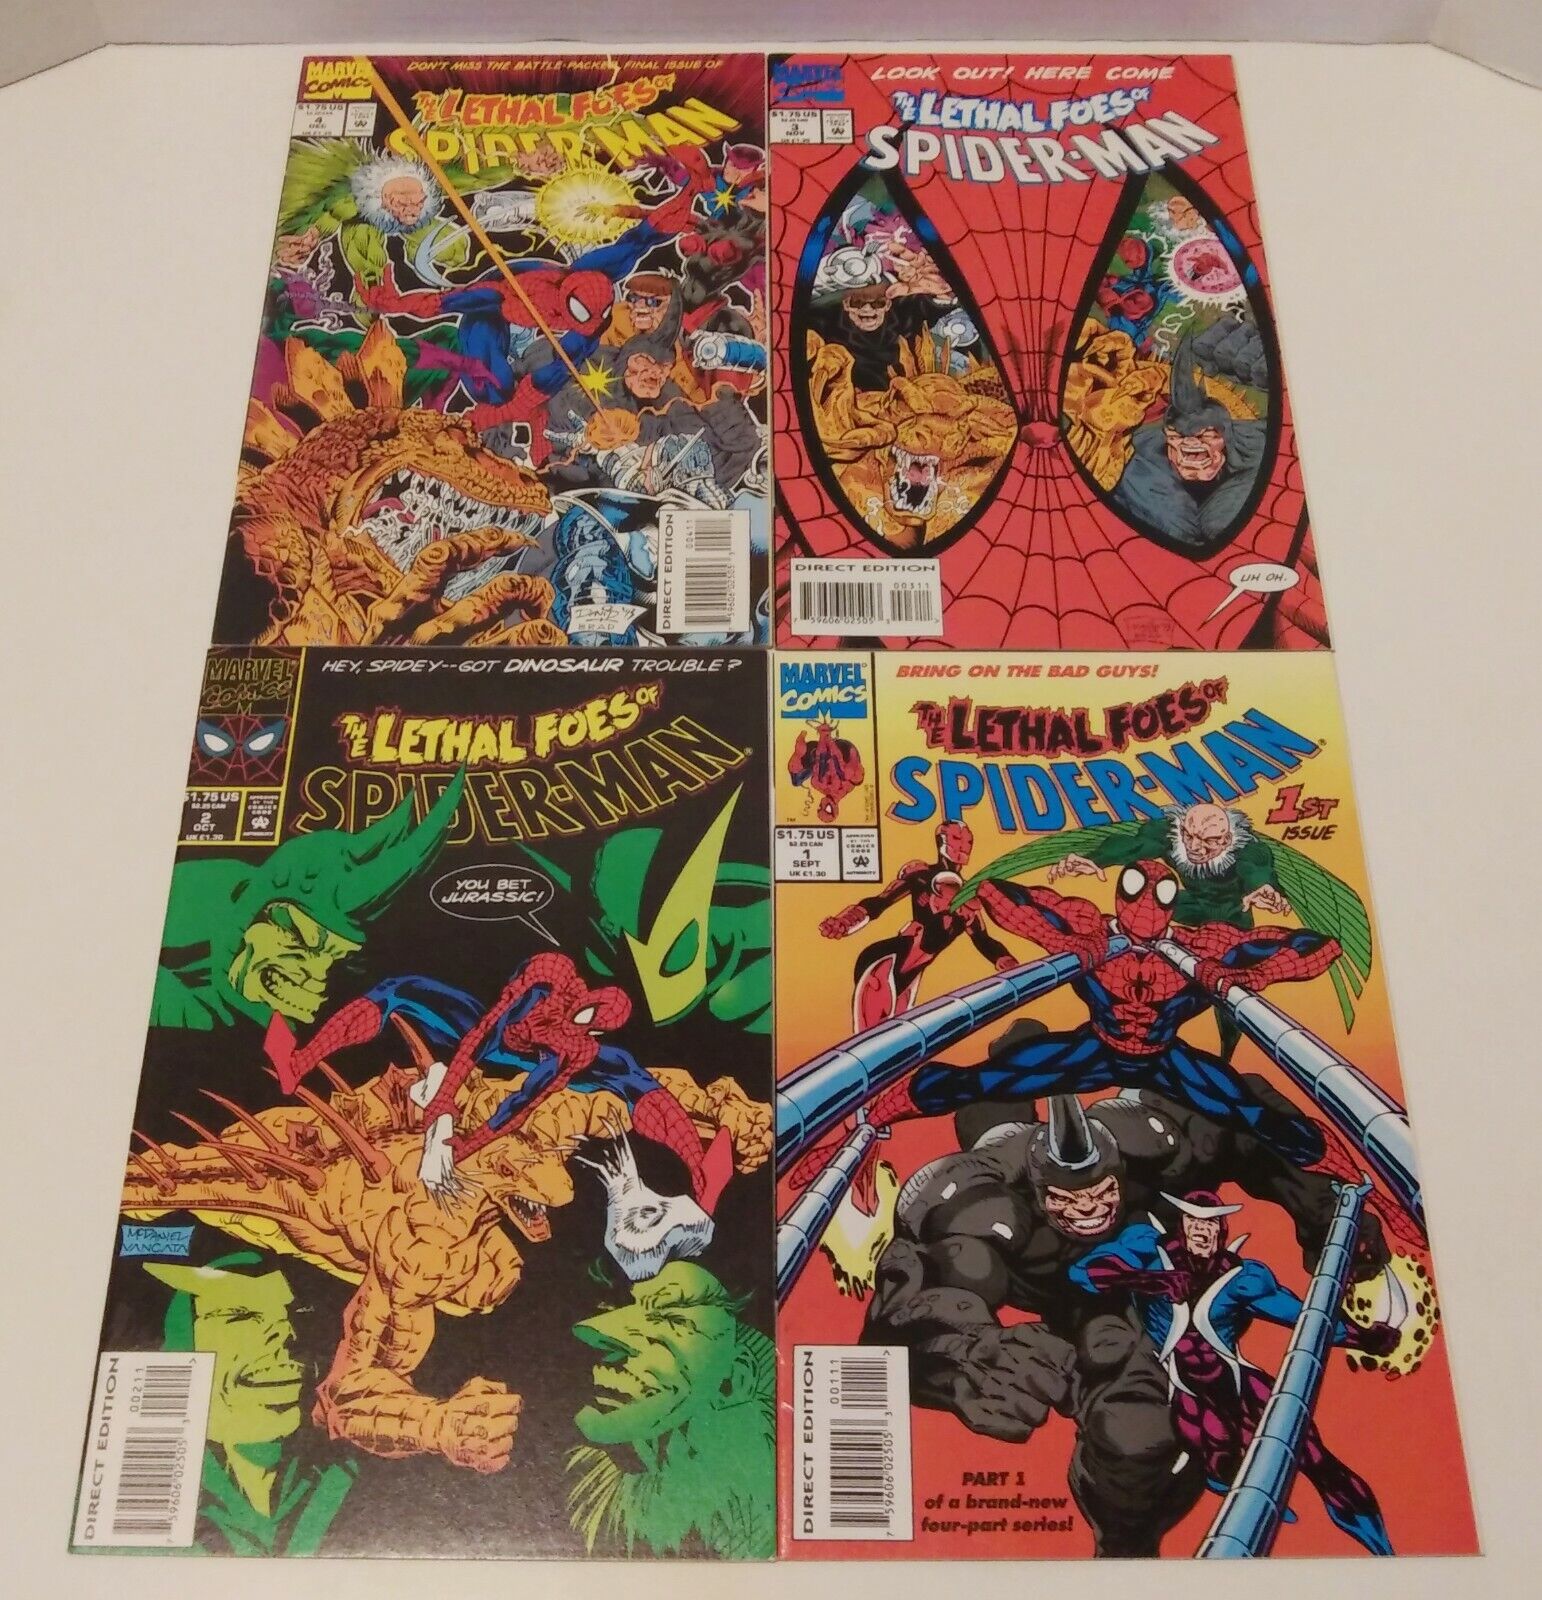 The Lethal Foes of Spider-Man #1-4 Marvel Comics 1993 lot full set run 1 2 3 4